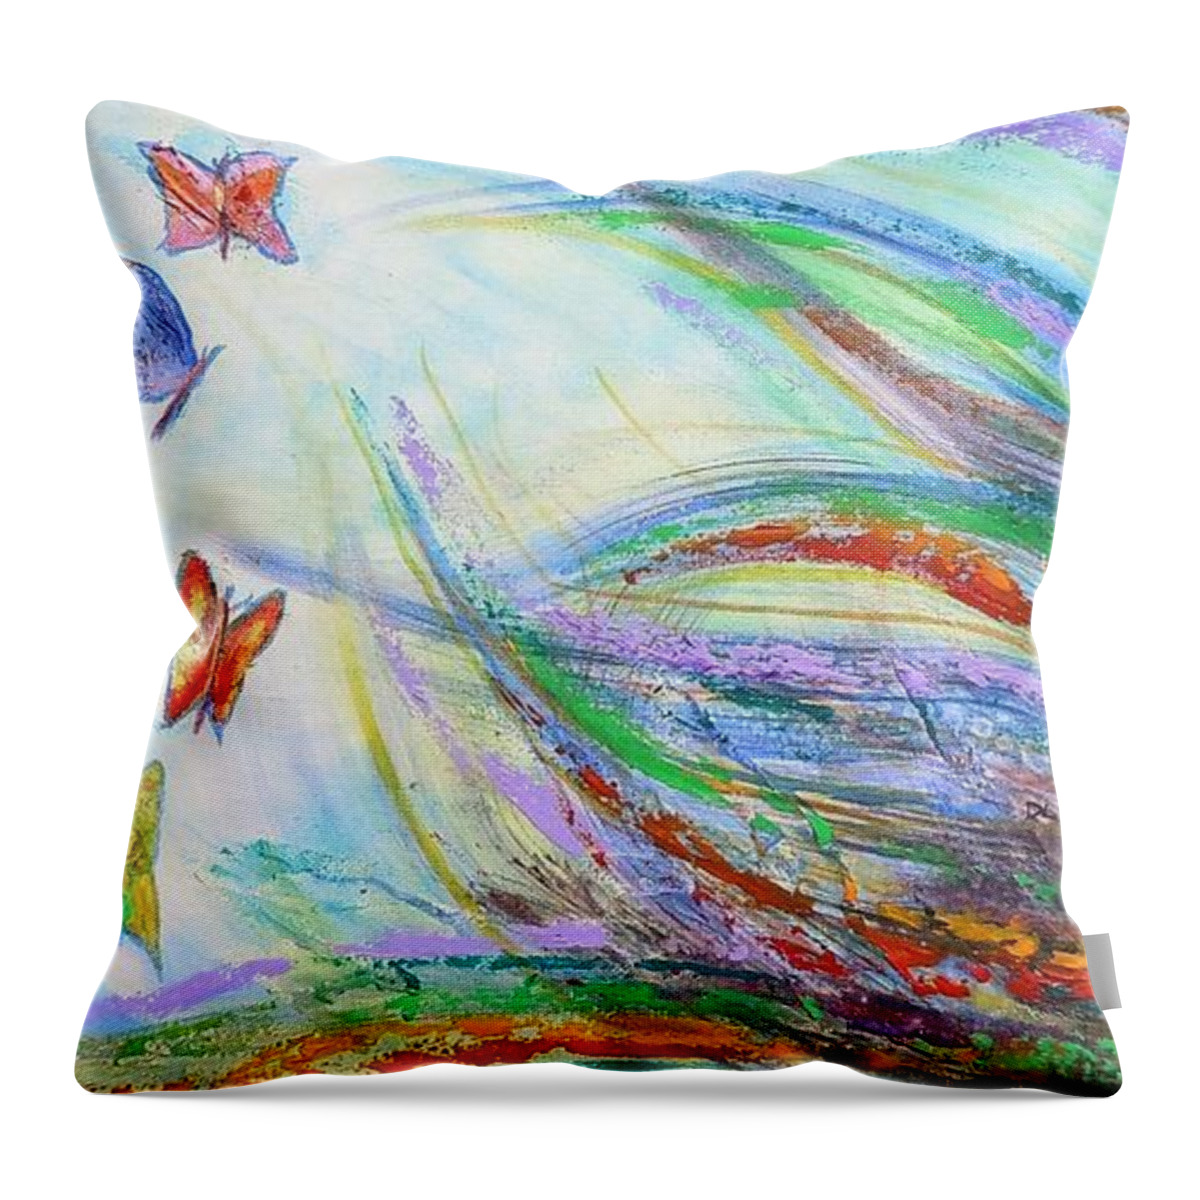  Throw Pillow featuring the painting New Beginnings by Deb Brown Maher